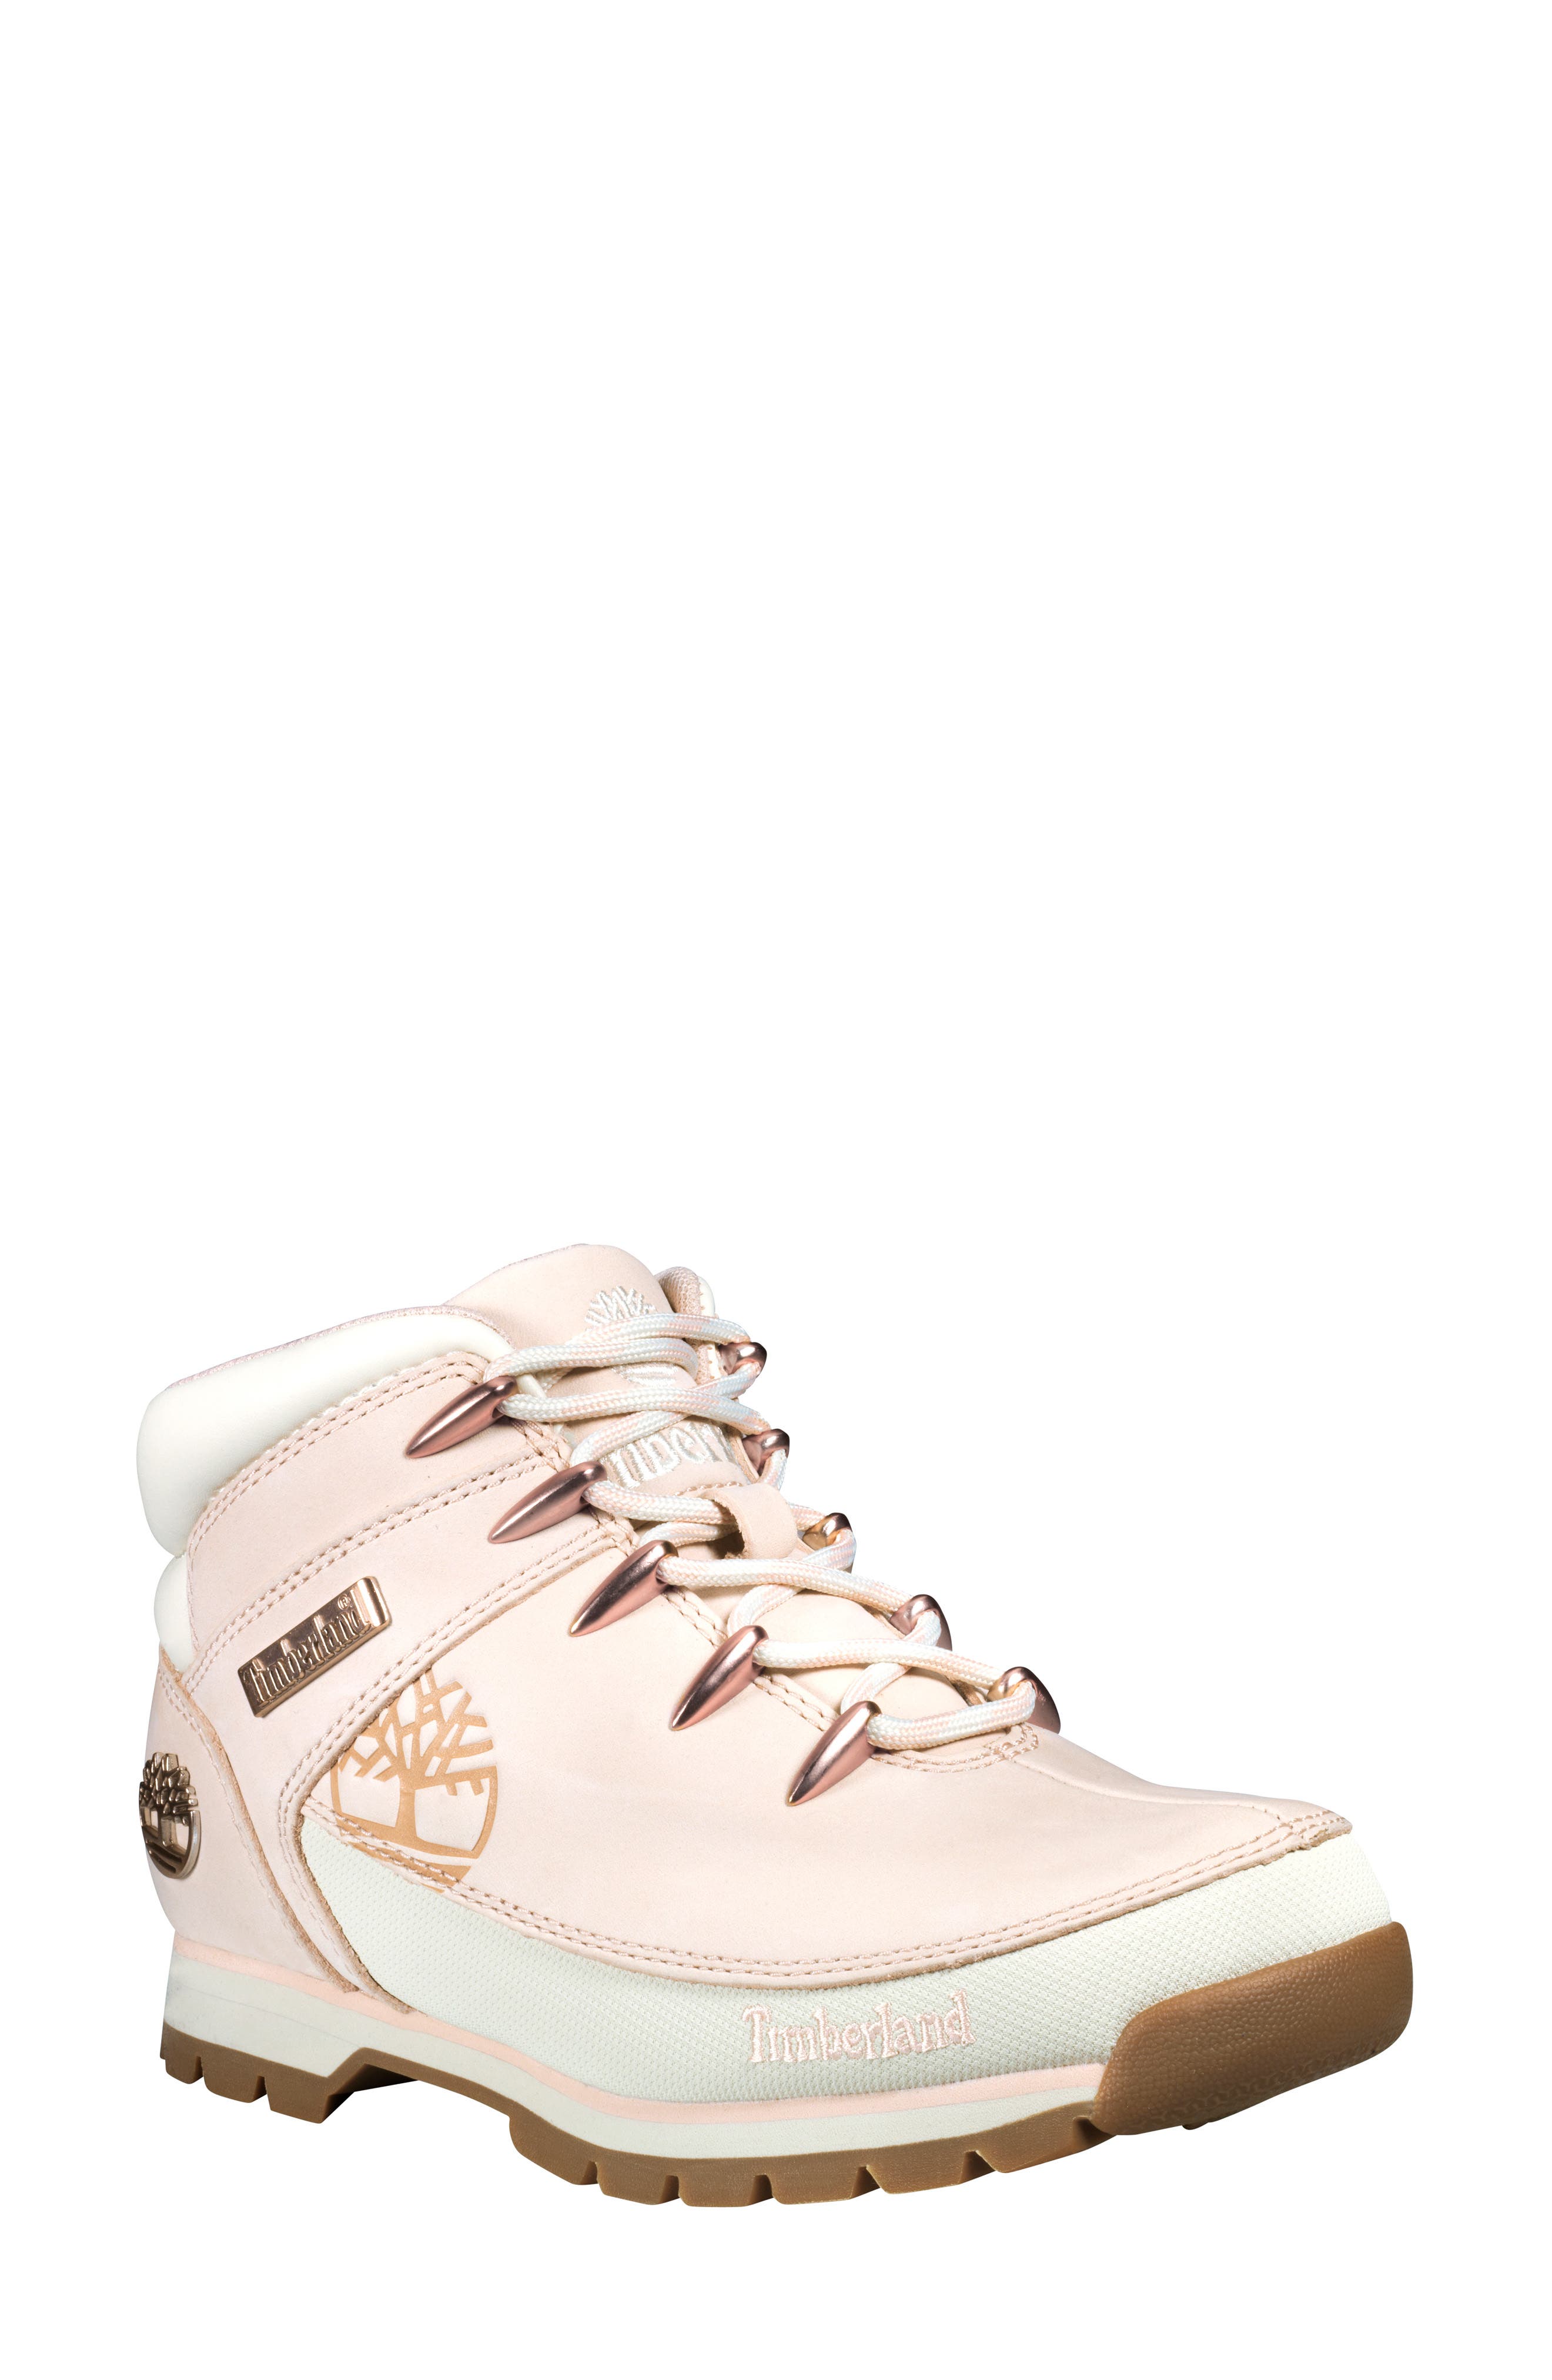 light pink hiking boots